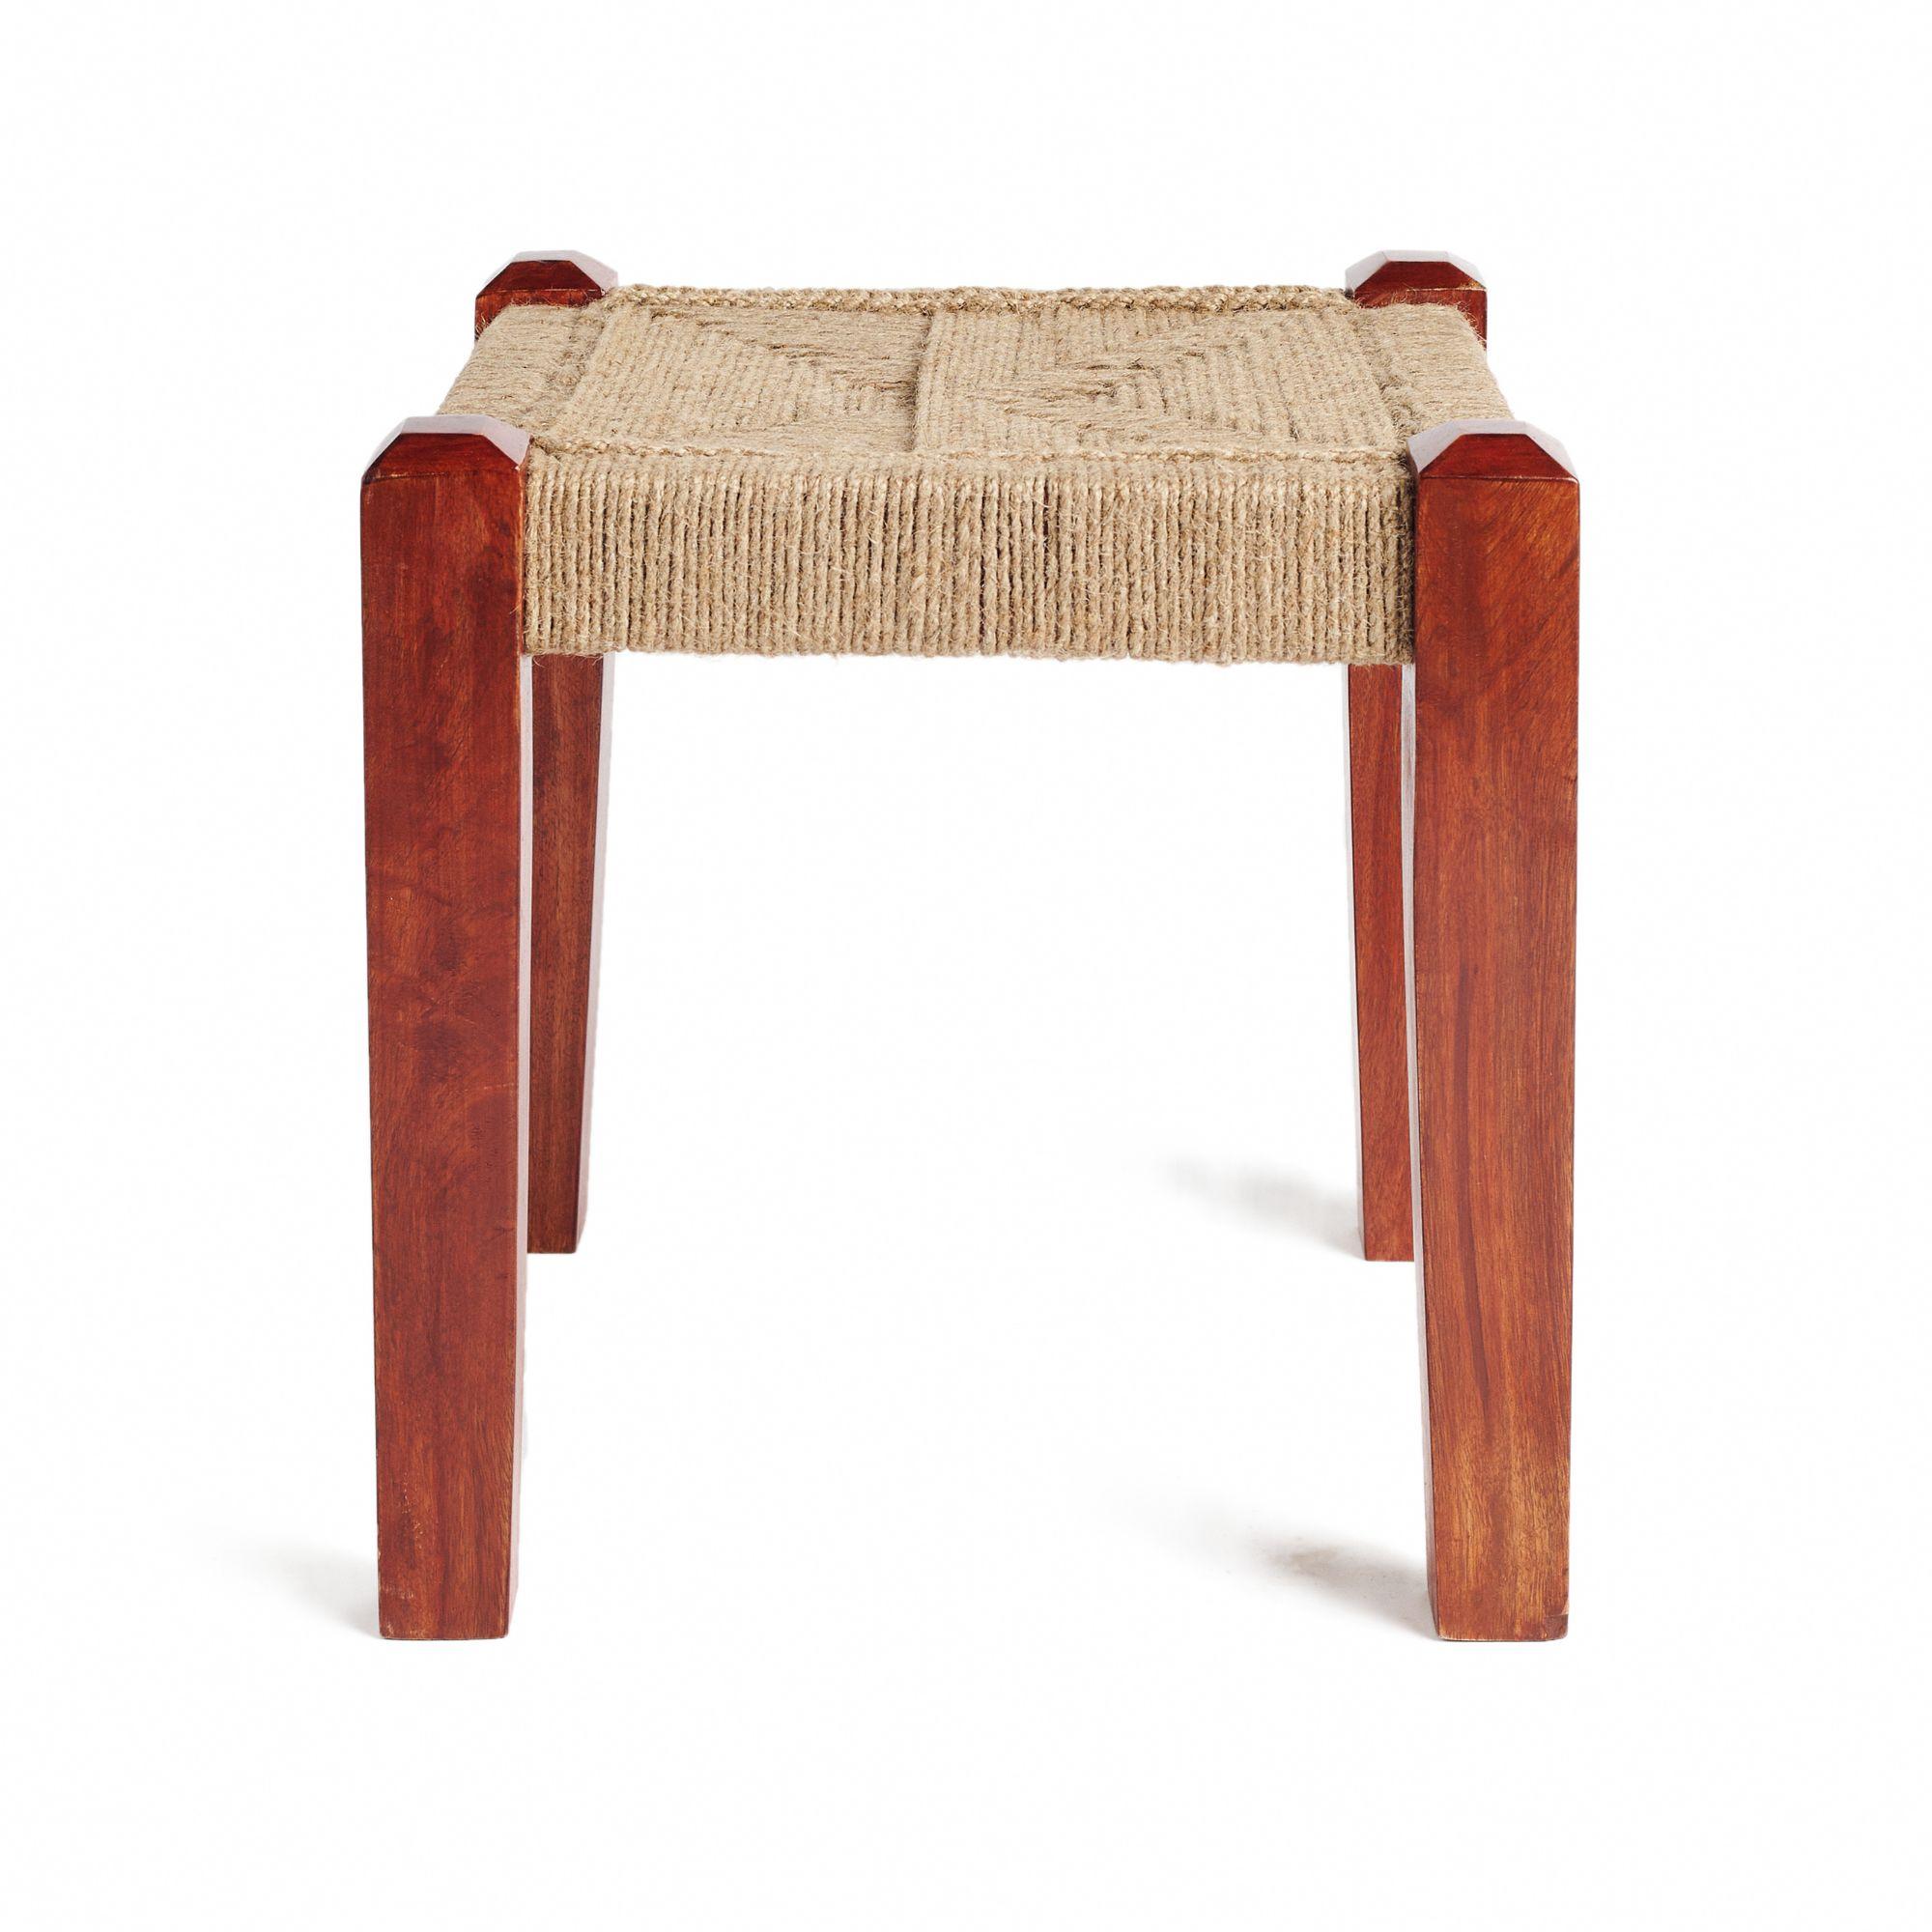 Alambh Neutral Stool is an artisanal creation made using natural fibers like jute. Carefully handwoven by women artisans with whom we are collaborating for a unique collaboration, this uses their skill of hand weaving to create unique two layer